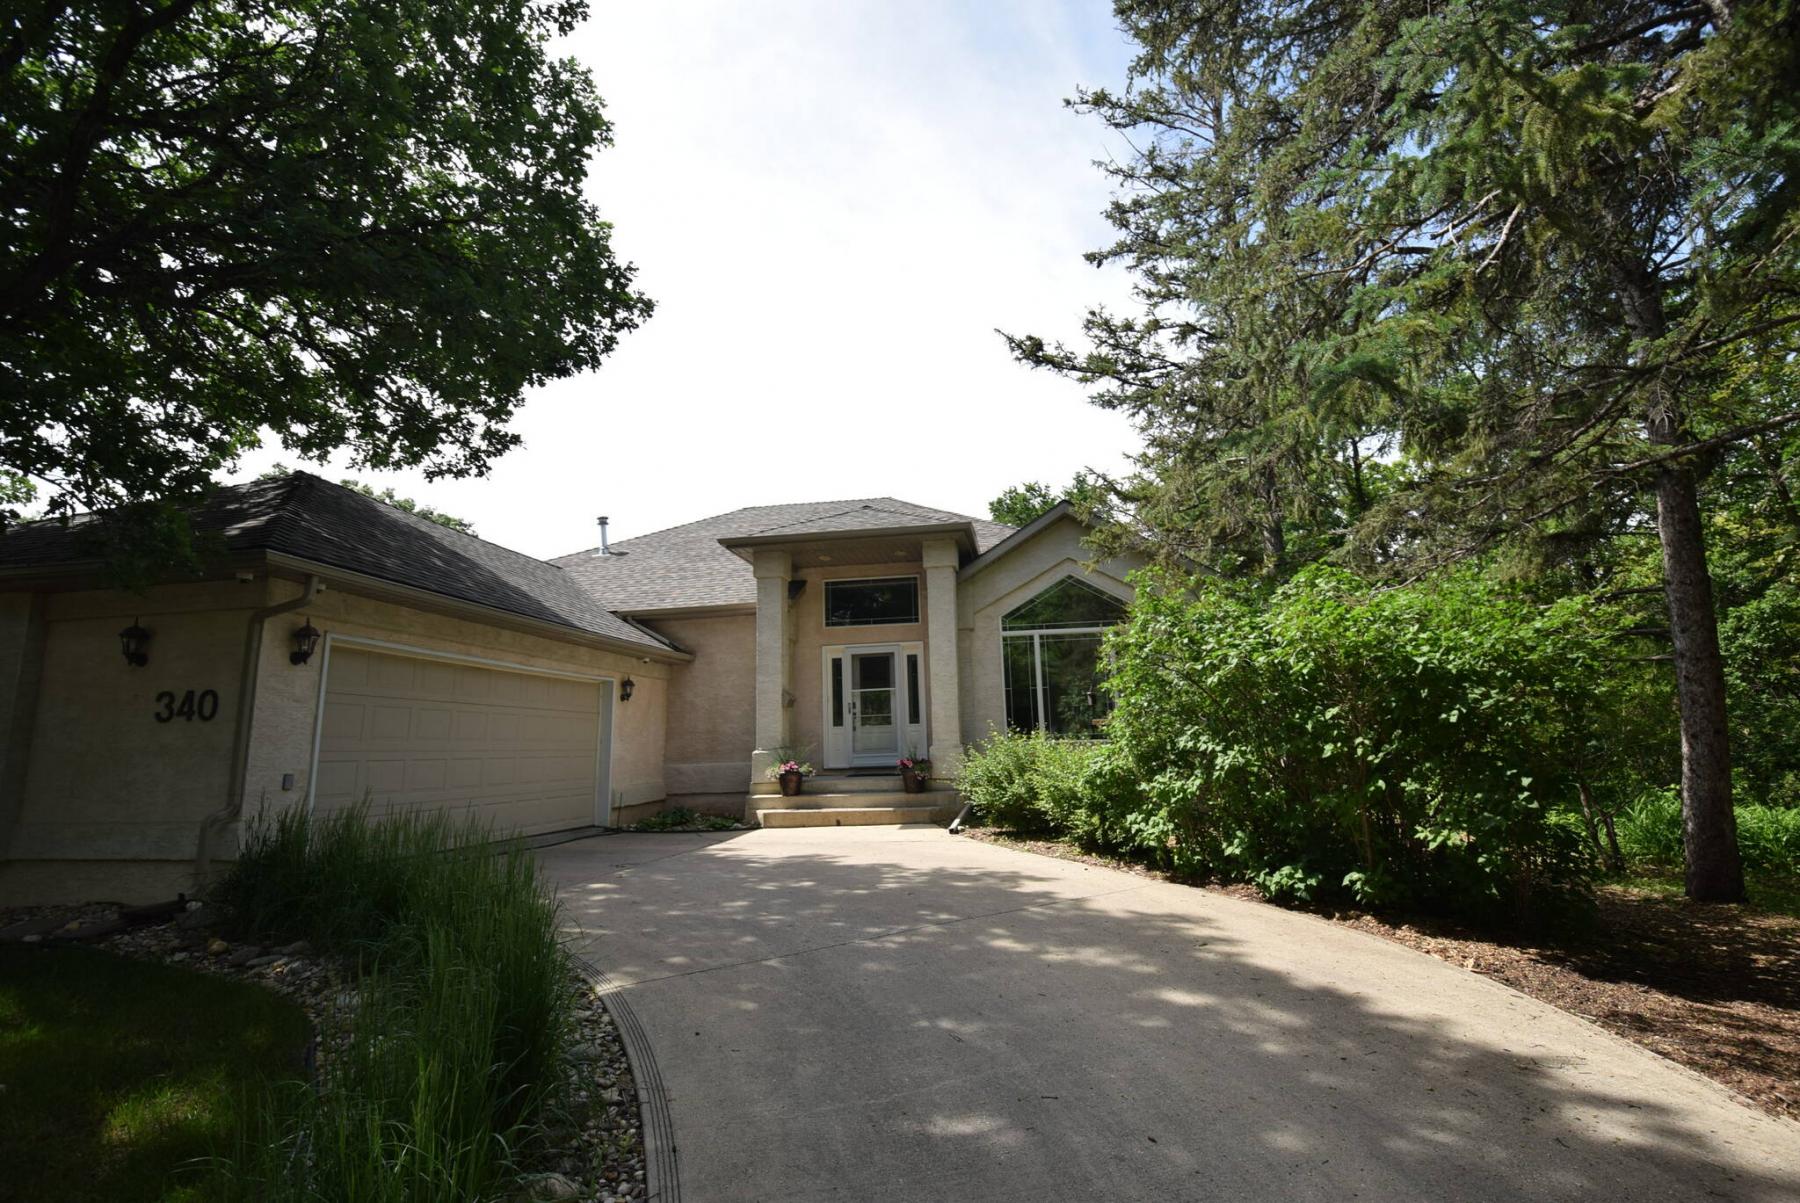 <p>Built in 1997 by Maric Homes, the beautifully-designed bungalow is situated on a large, park-like lot next to gorgeous Bunn&rsquo;s Creek Park.</p>